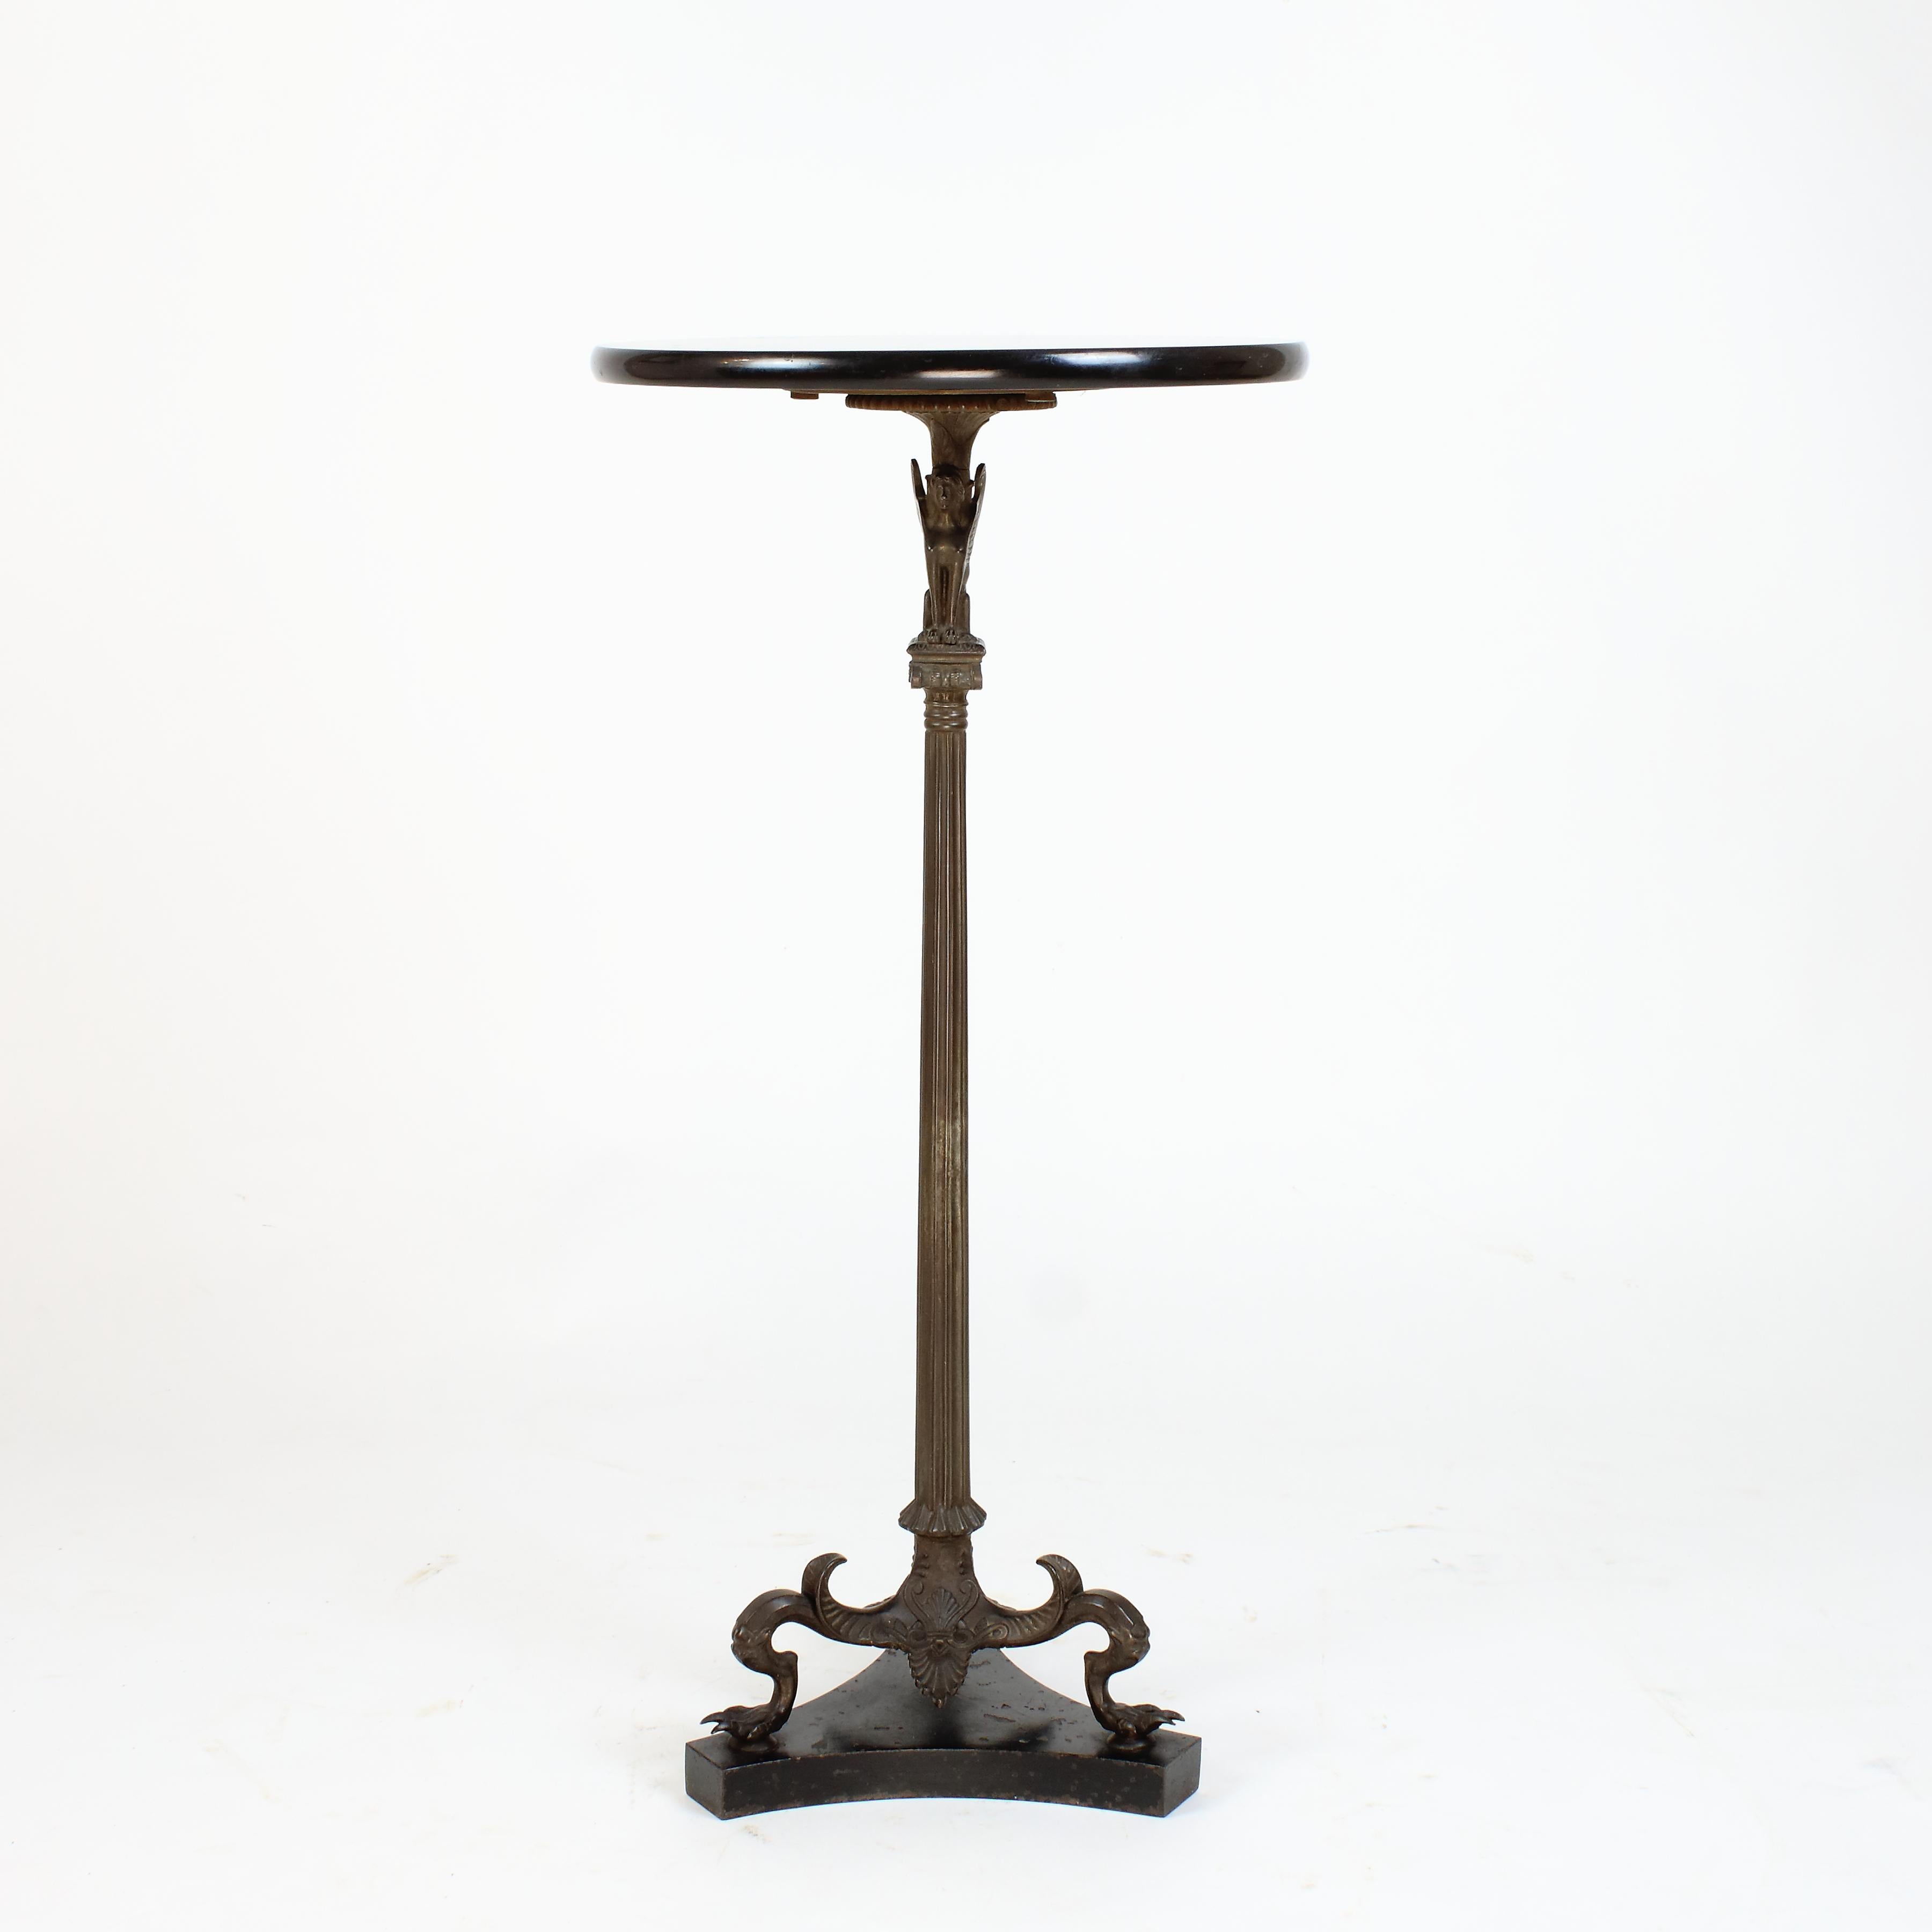 Mid 19th Century Italian Empire Patinated Bronze Grand Tour Sphinx Figure Small Table Guéridon

Small Tripod table standing three lizard paw feet which rest on a tripod plinth. Slender and fluted tapering columnar stem with an Ionic capital